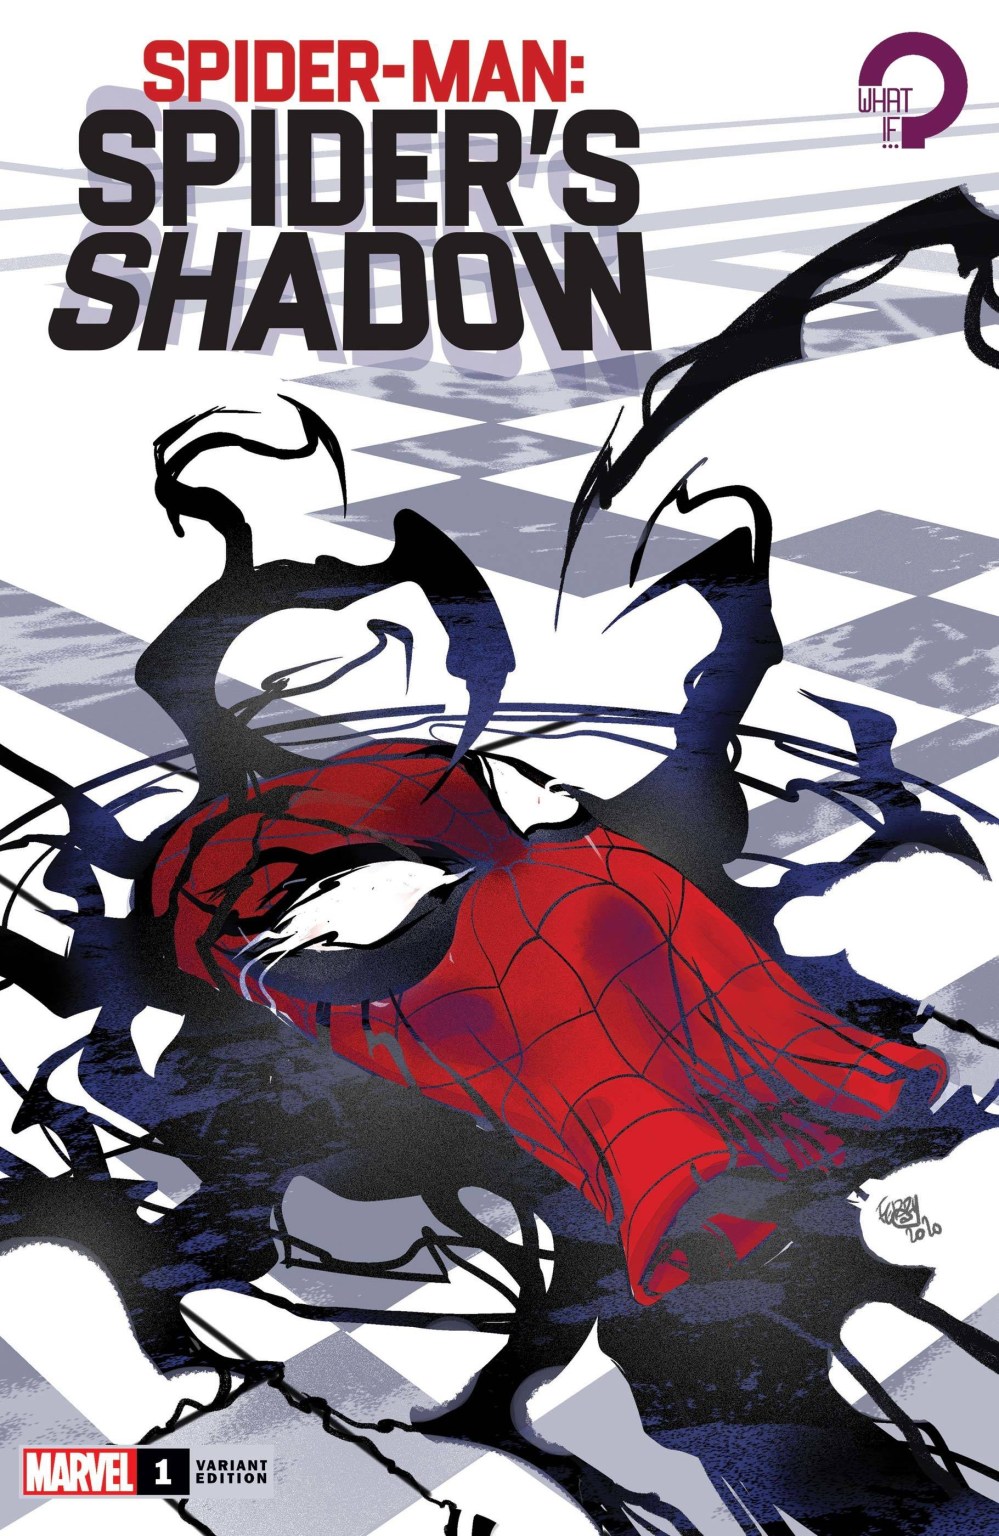 Spider-Man: Spider's Shadow #1 preview